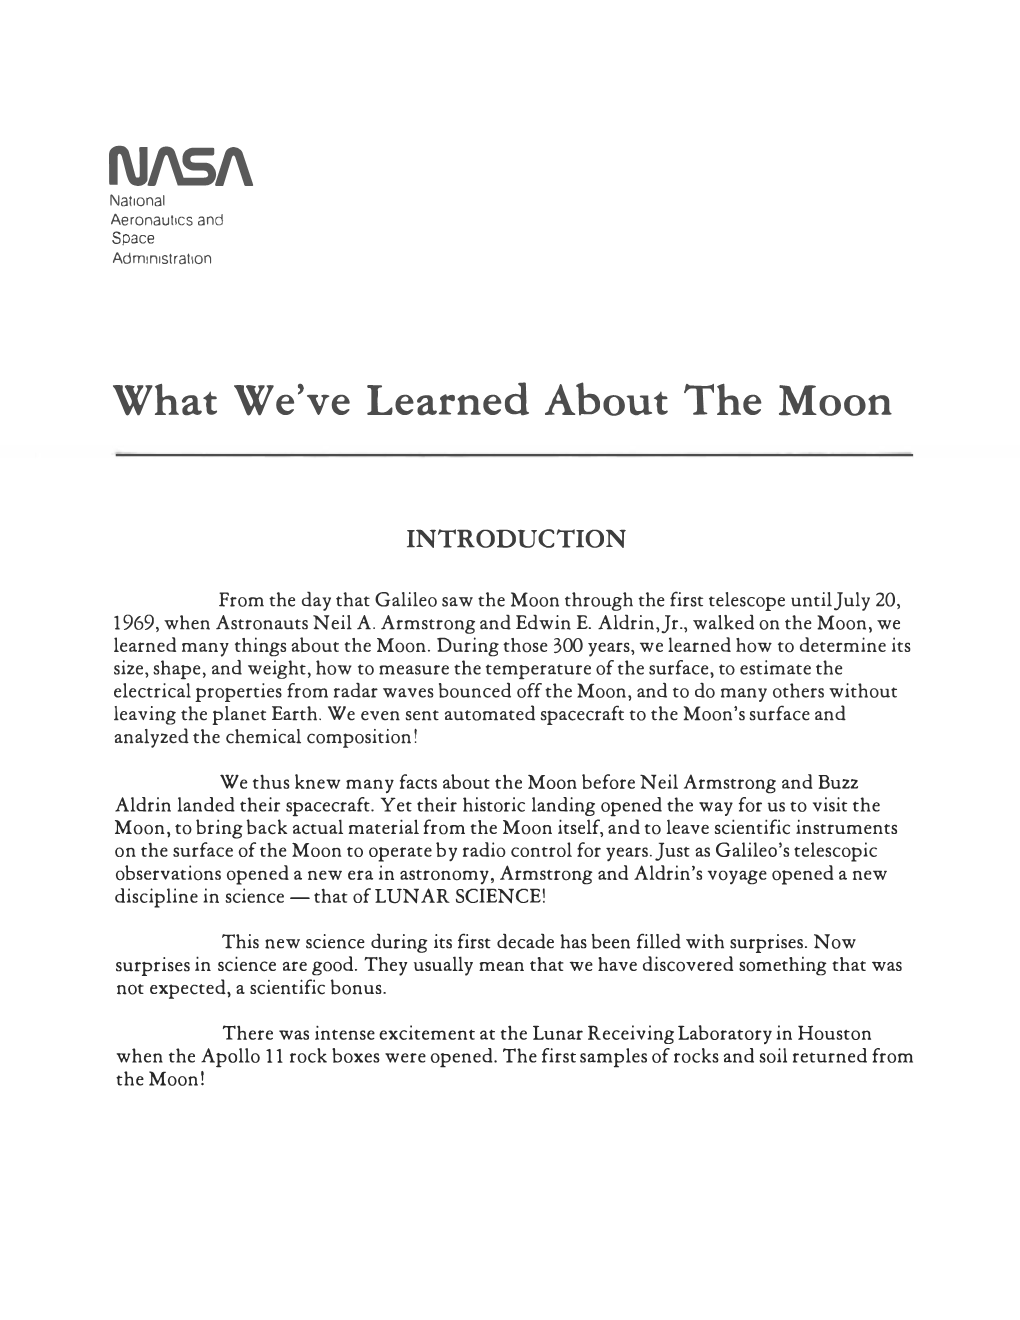 What We Have Learned About the Moon